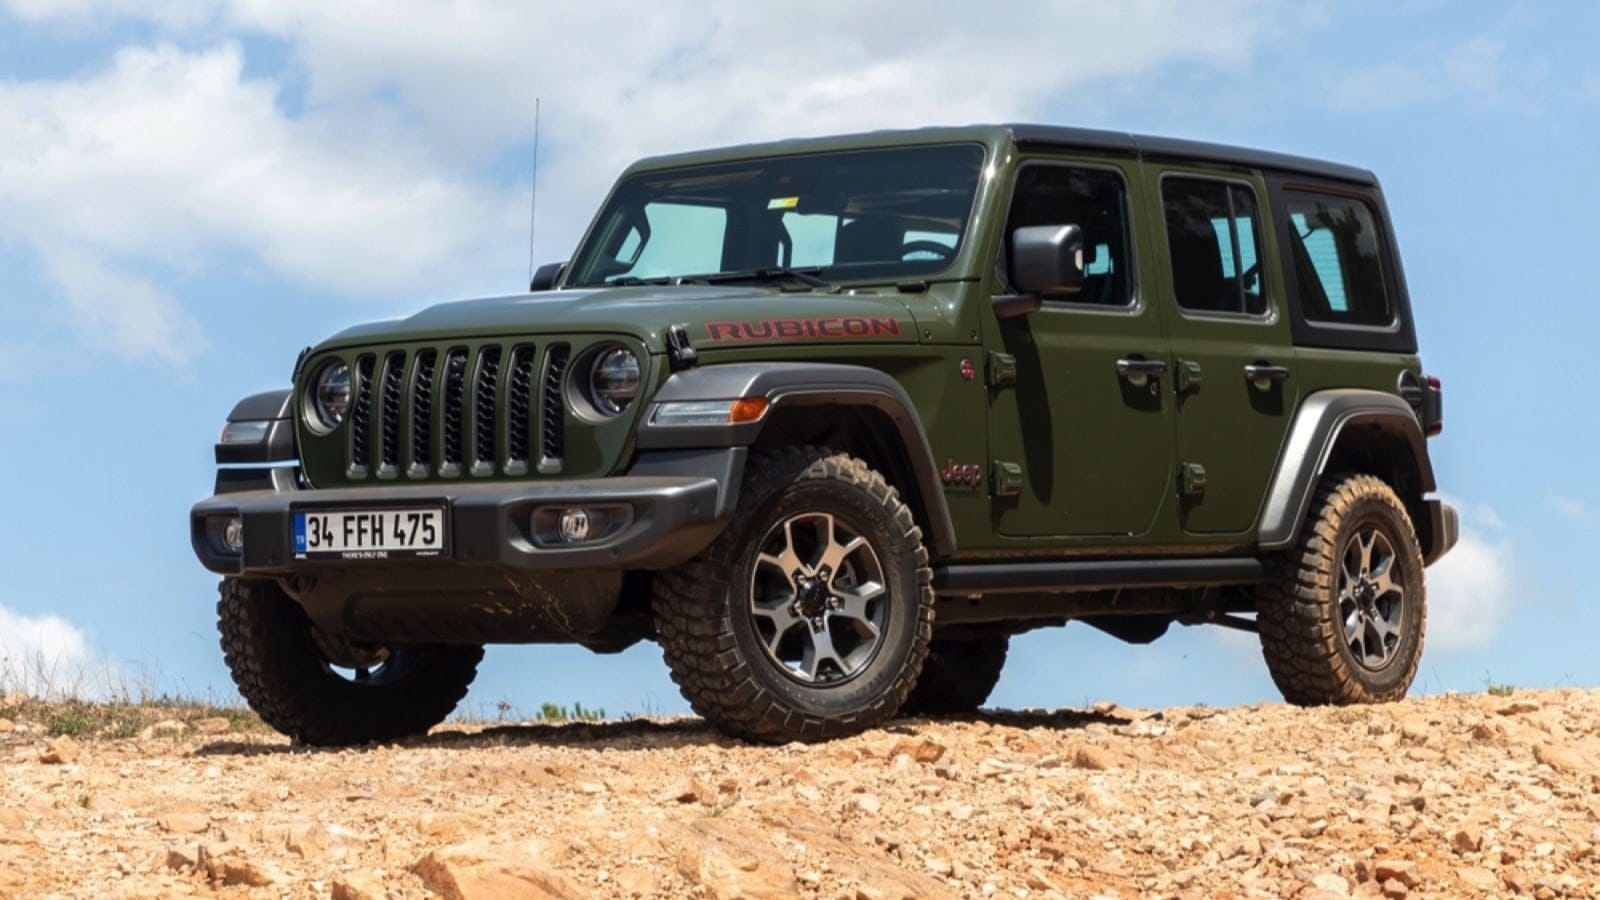 Istanbul, Turkey - August 9 2022 : Jeep Wrangler Rubicon is the 4-door off-road vehicle manufactured by Jeep.